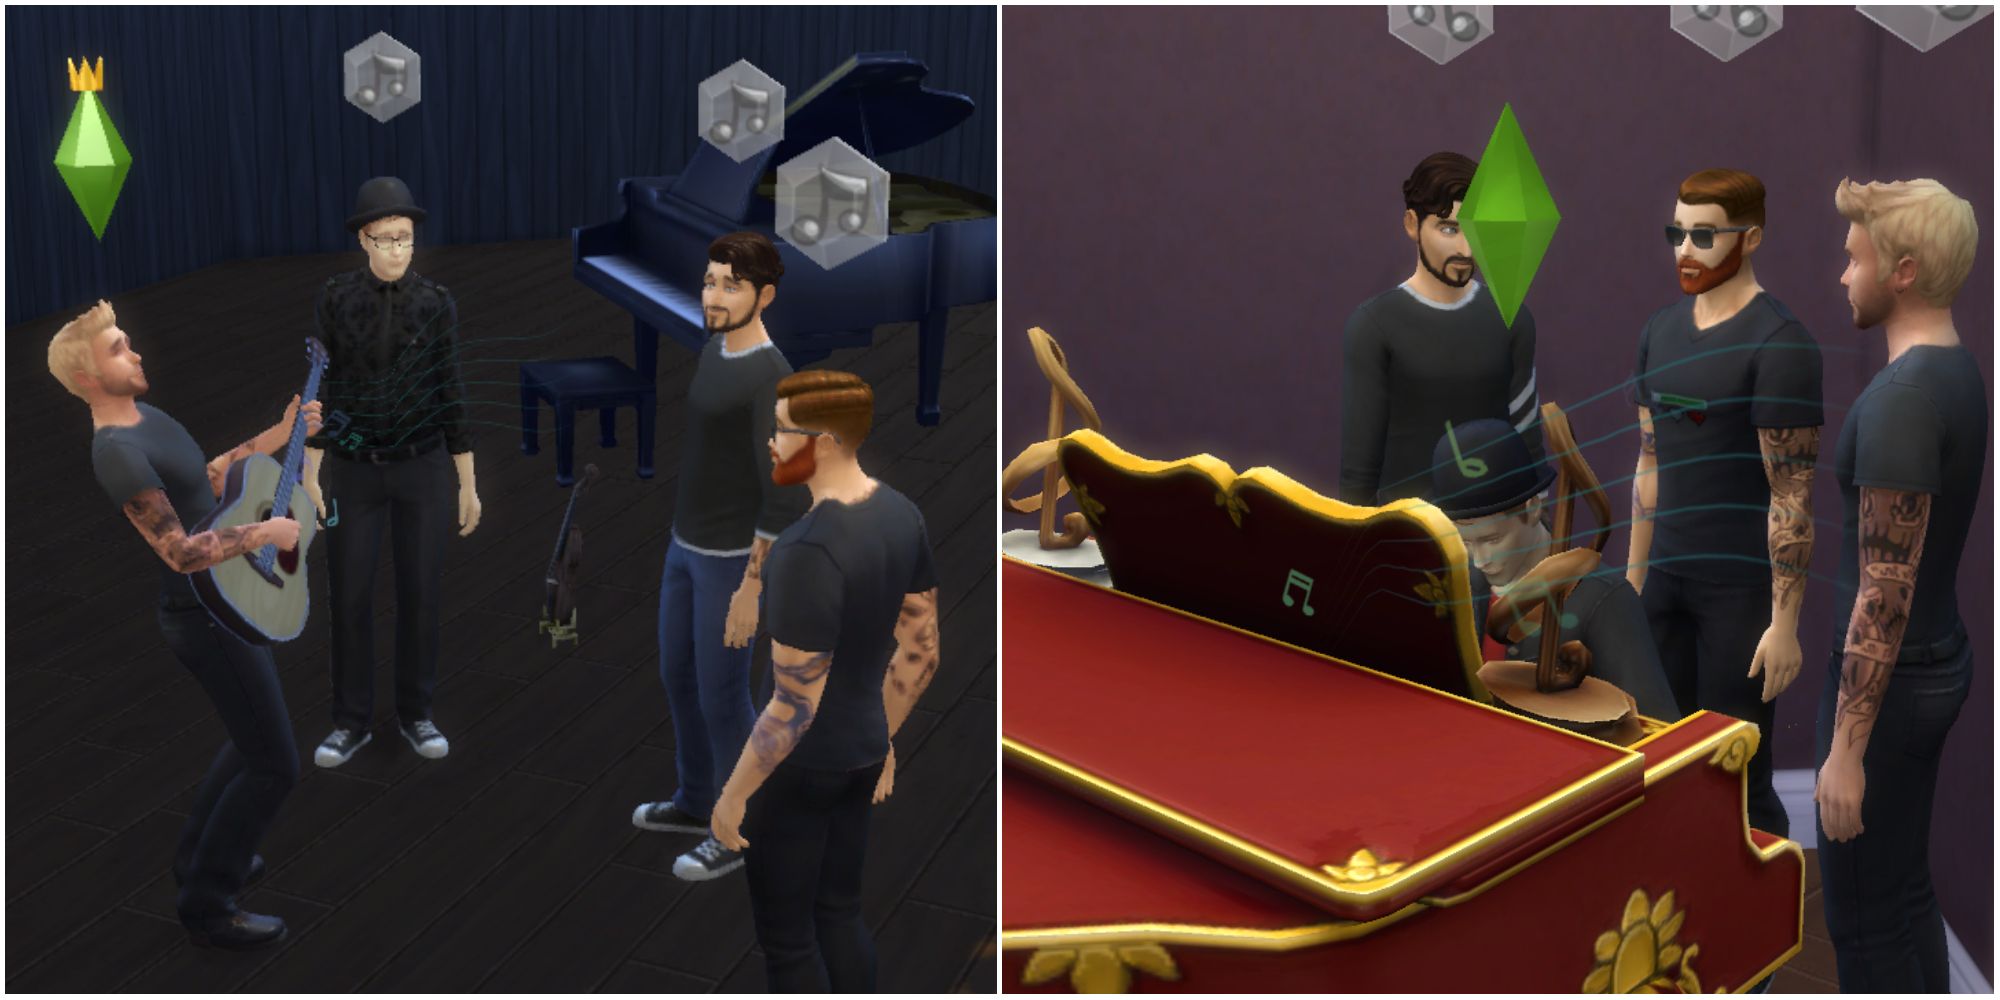 A group of Sims meet to play music together at a band club gathering